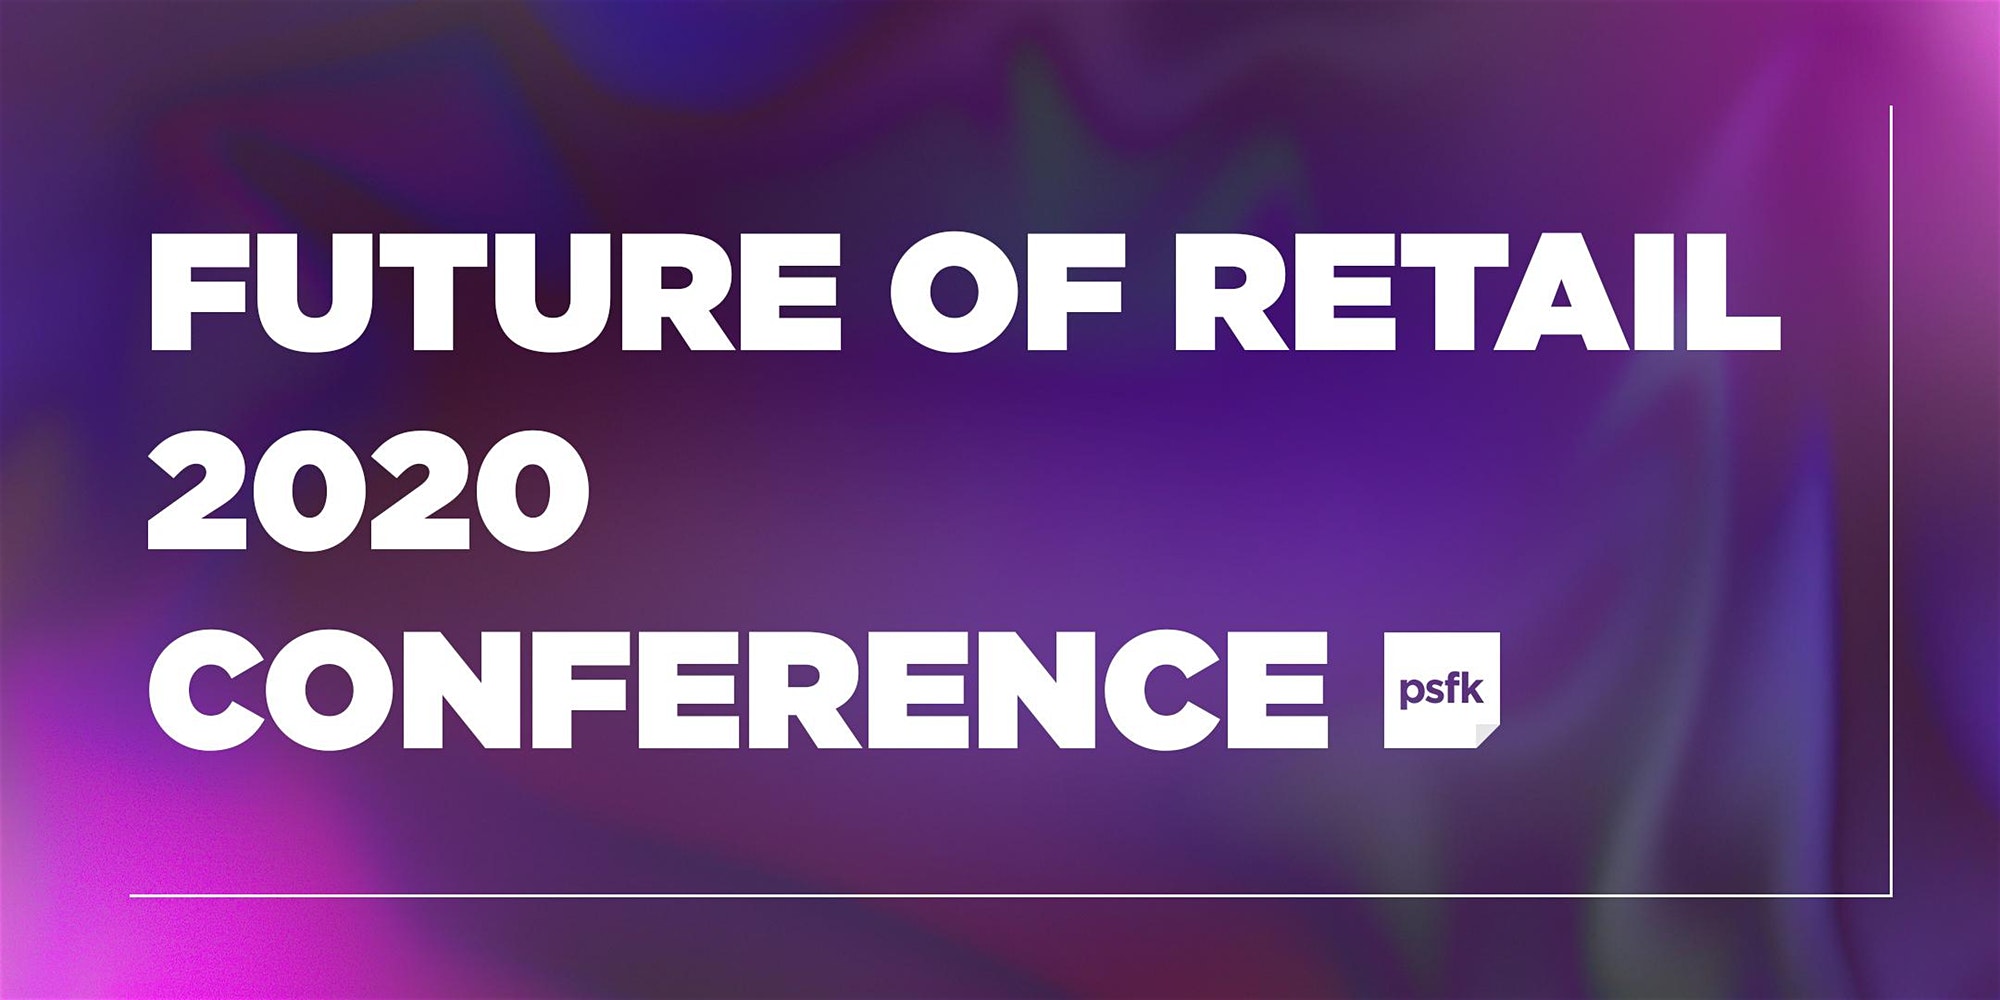 The PSFK Future of Retail 2020 Conference - A NYRIW Event